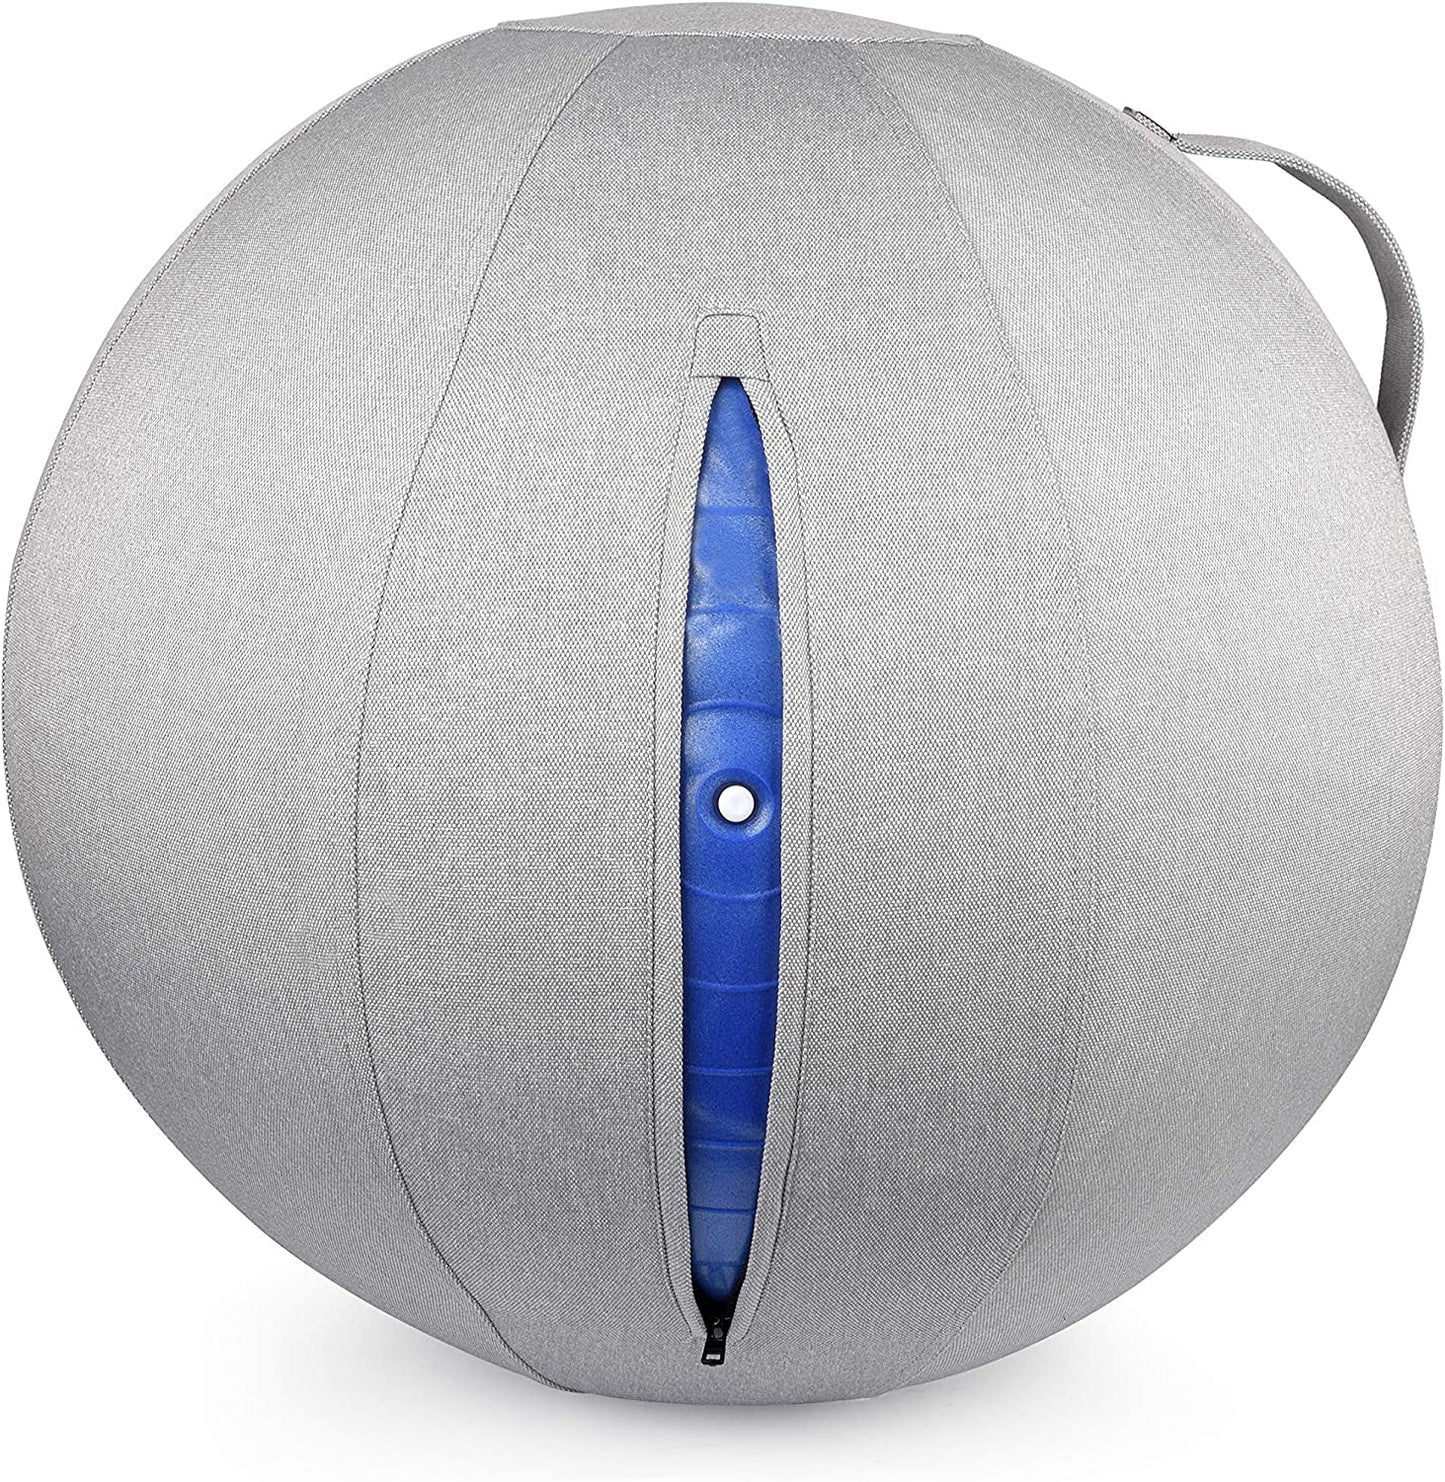 Stability Ball 65cm with Canvas Cover